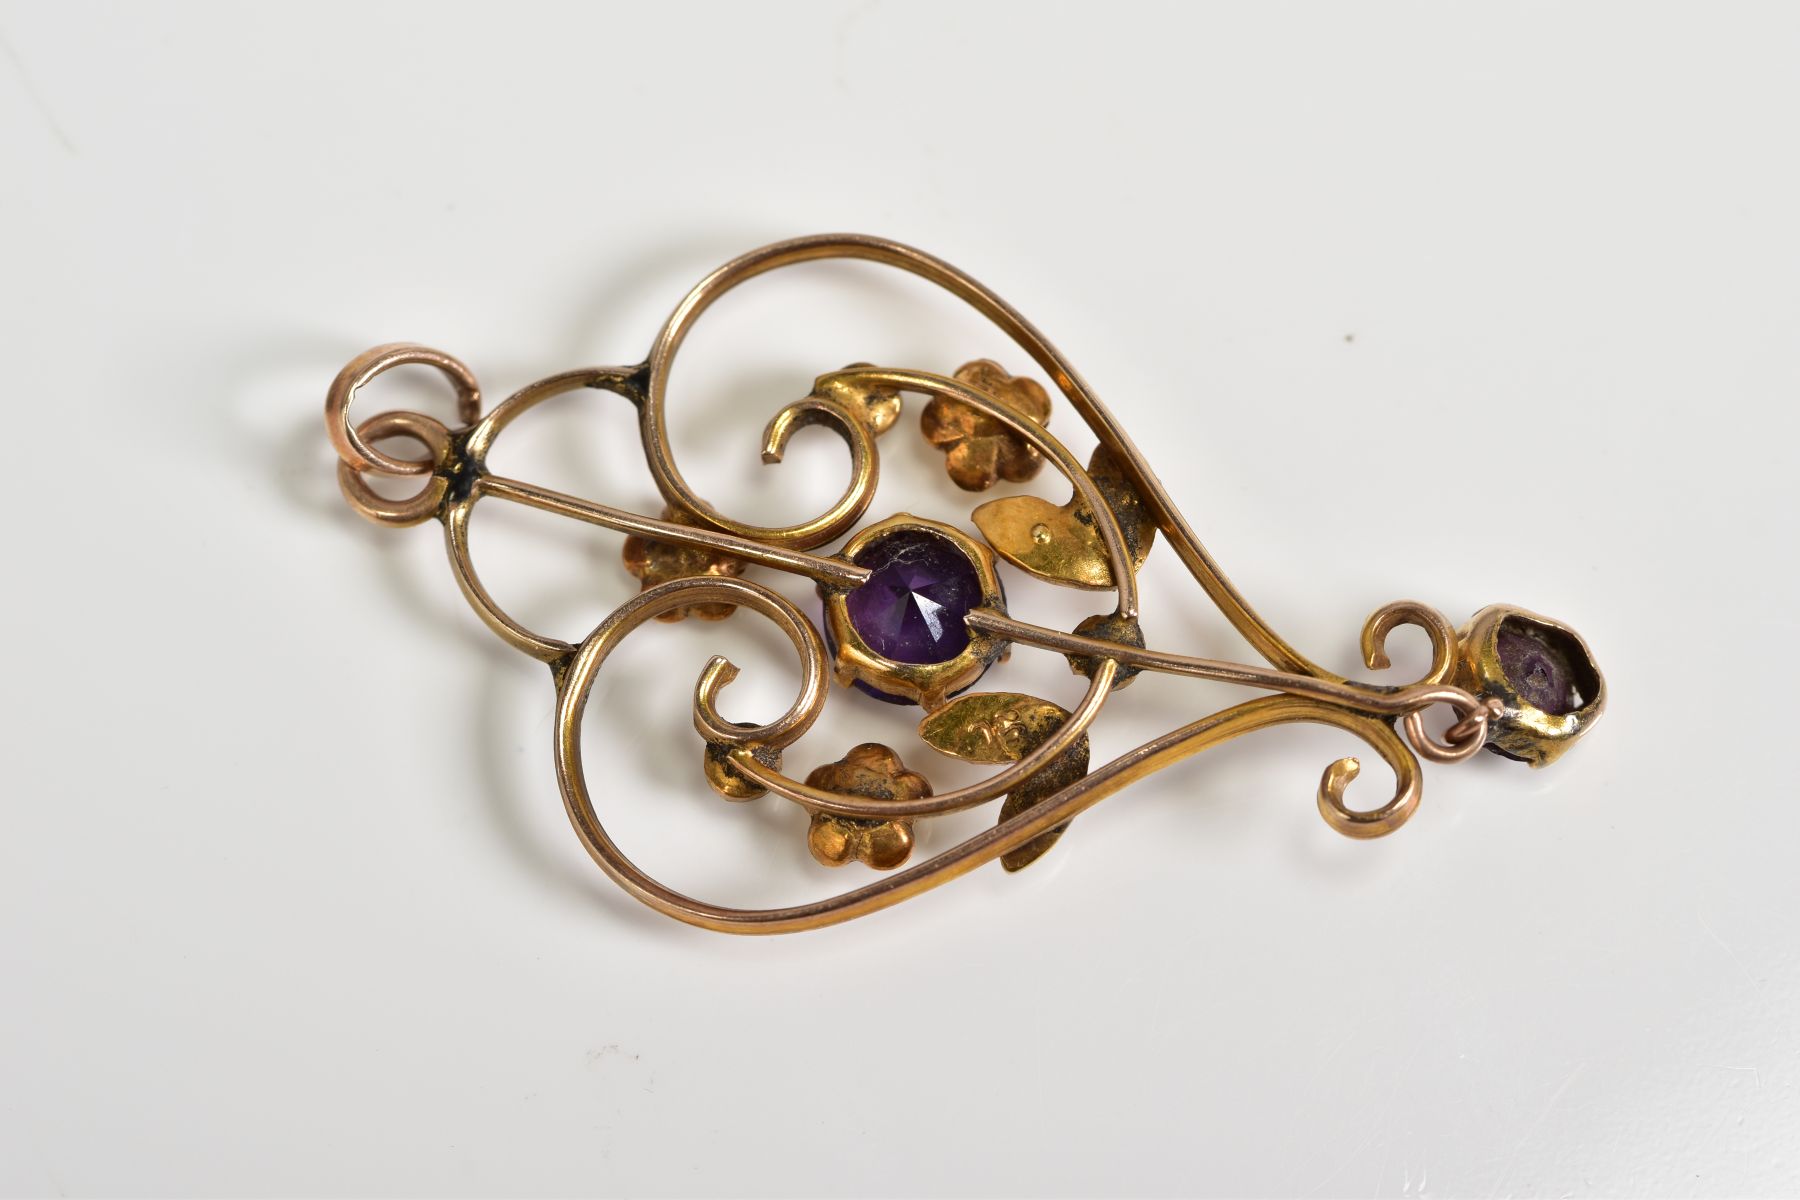 AN EDWARDIAN YELLOW METAL BROOCH, of openwork design, central panel set with a purple garnet - Image 2 of 2